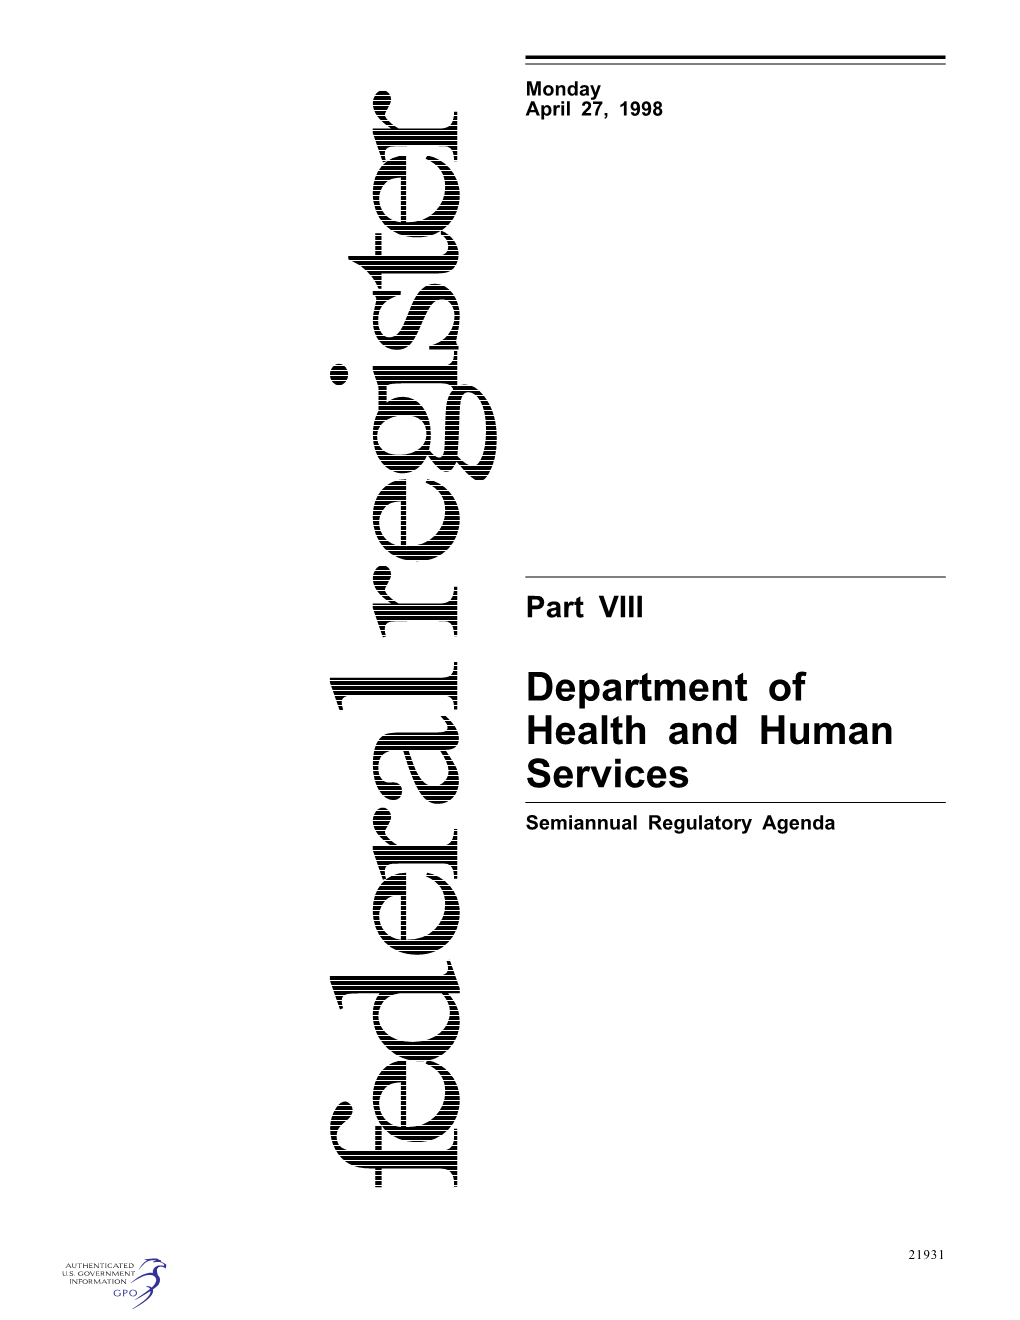 Department of Health and Human Services (Hhs)